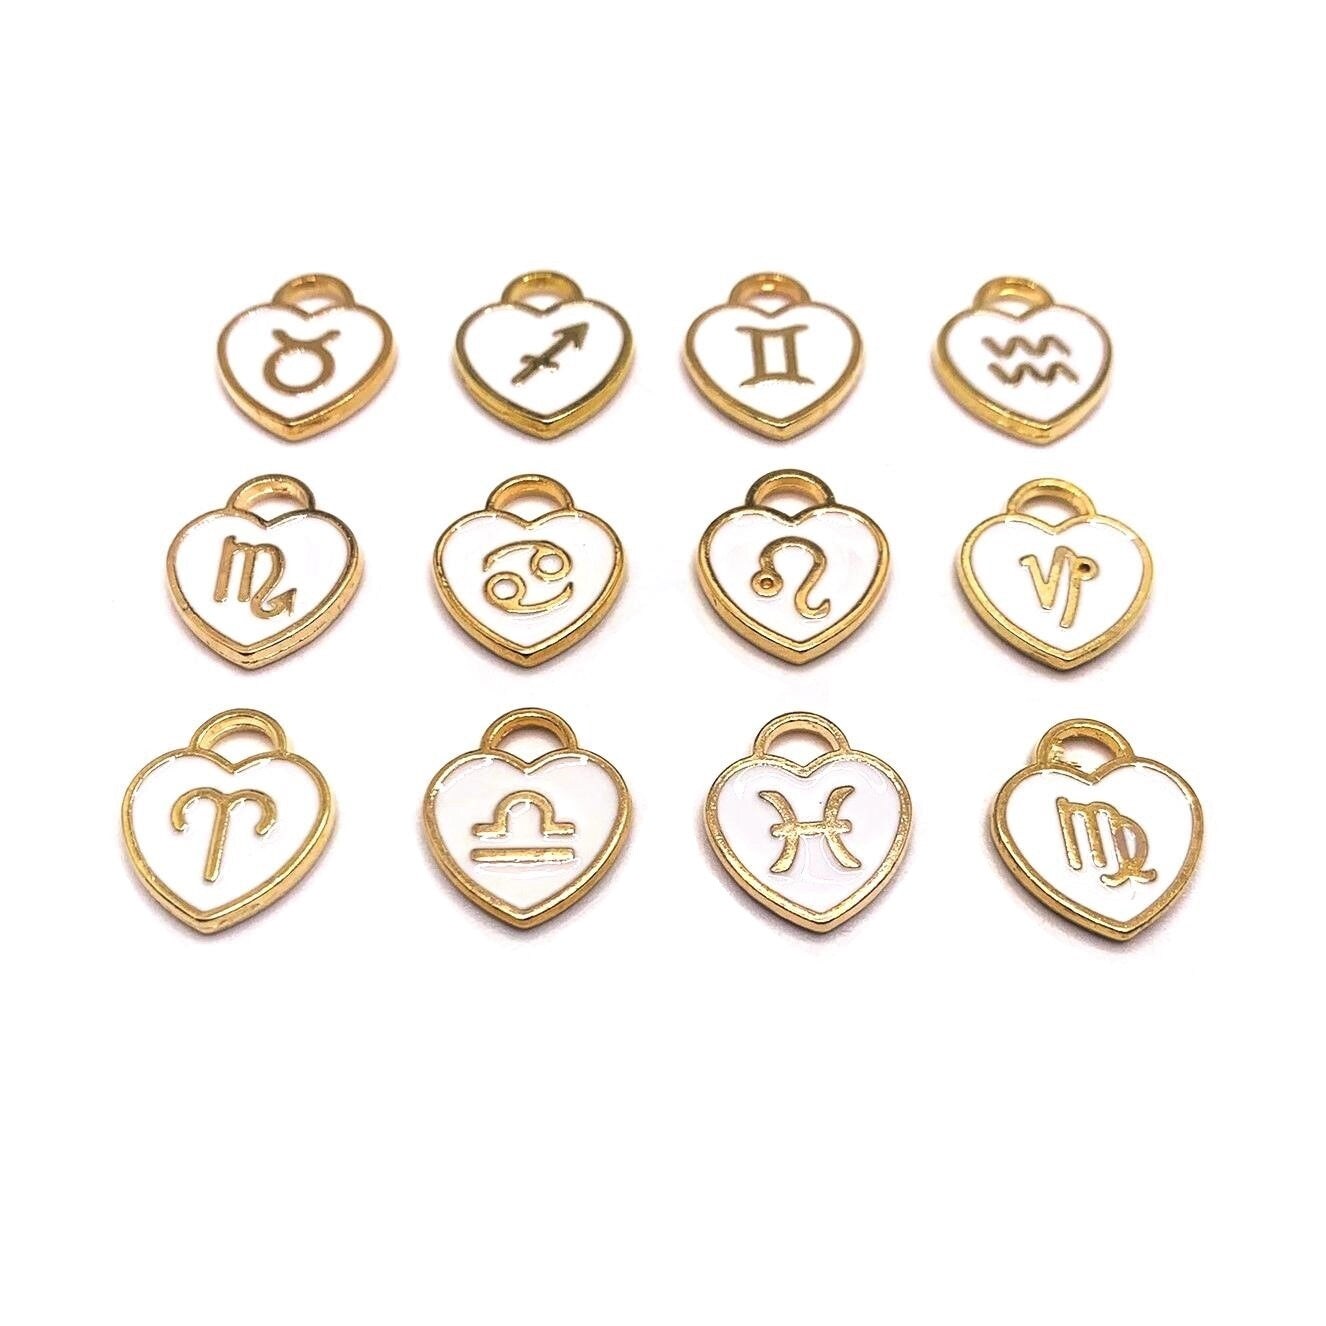 12 or 60 Pieces: White Enamel and Gold Zodiac/Astrology Heart Charms, Double Sided